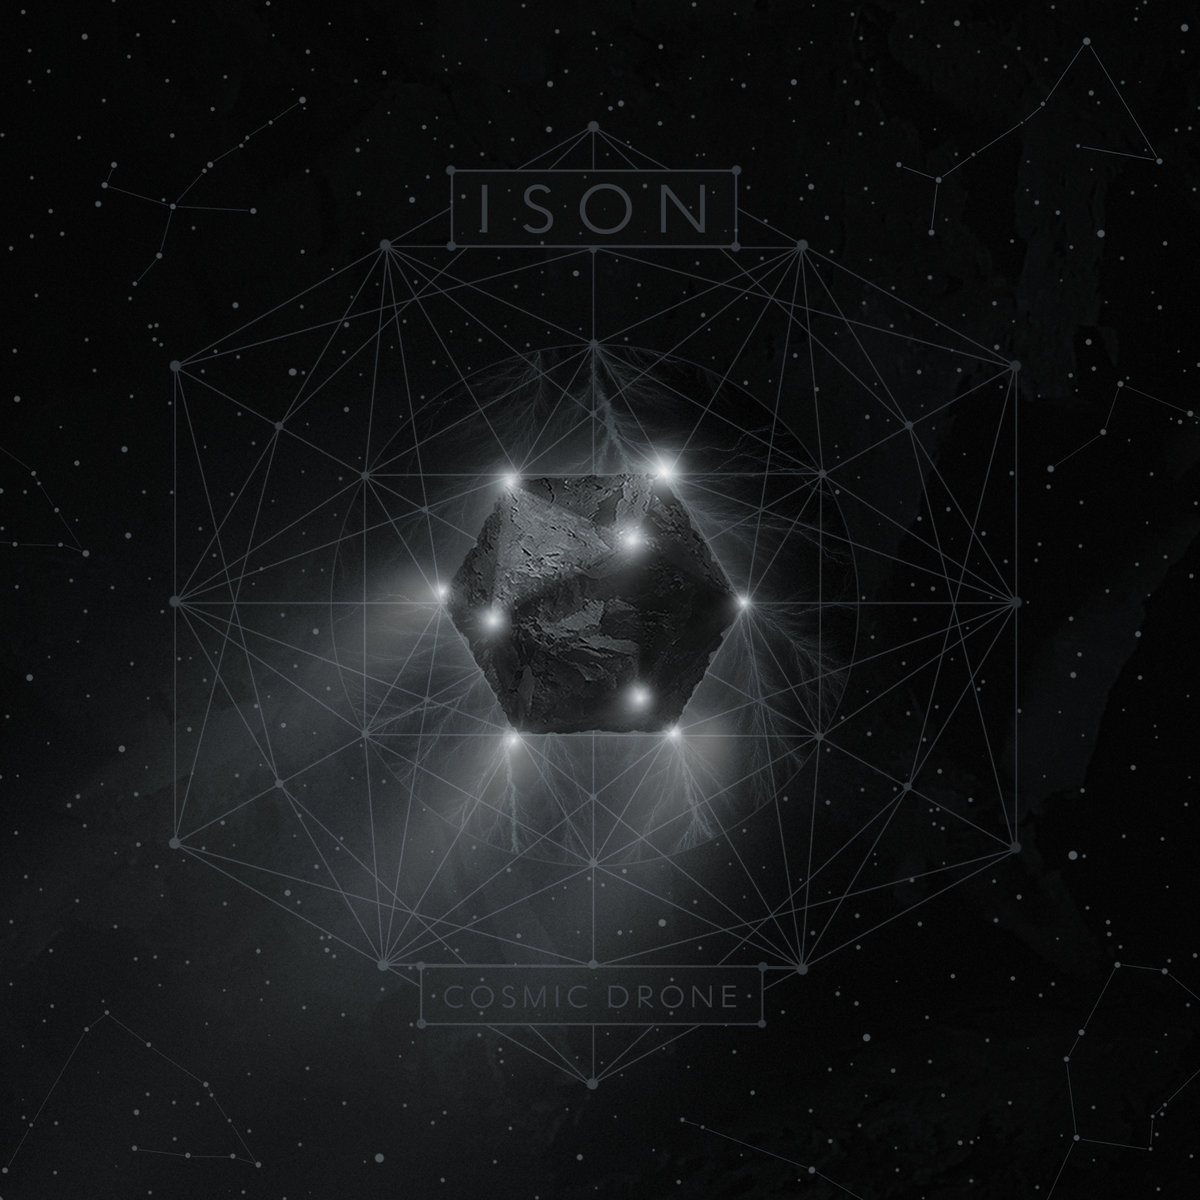 ISON - COSMIC DRONE - Reviews - Album of The Year